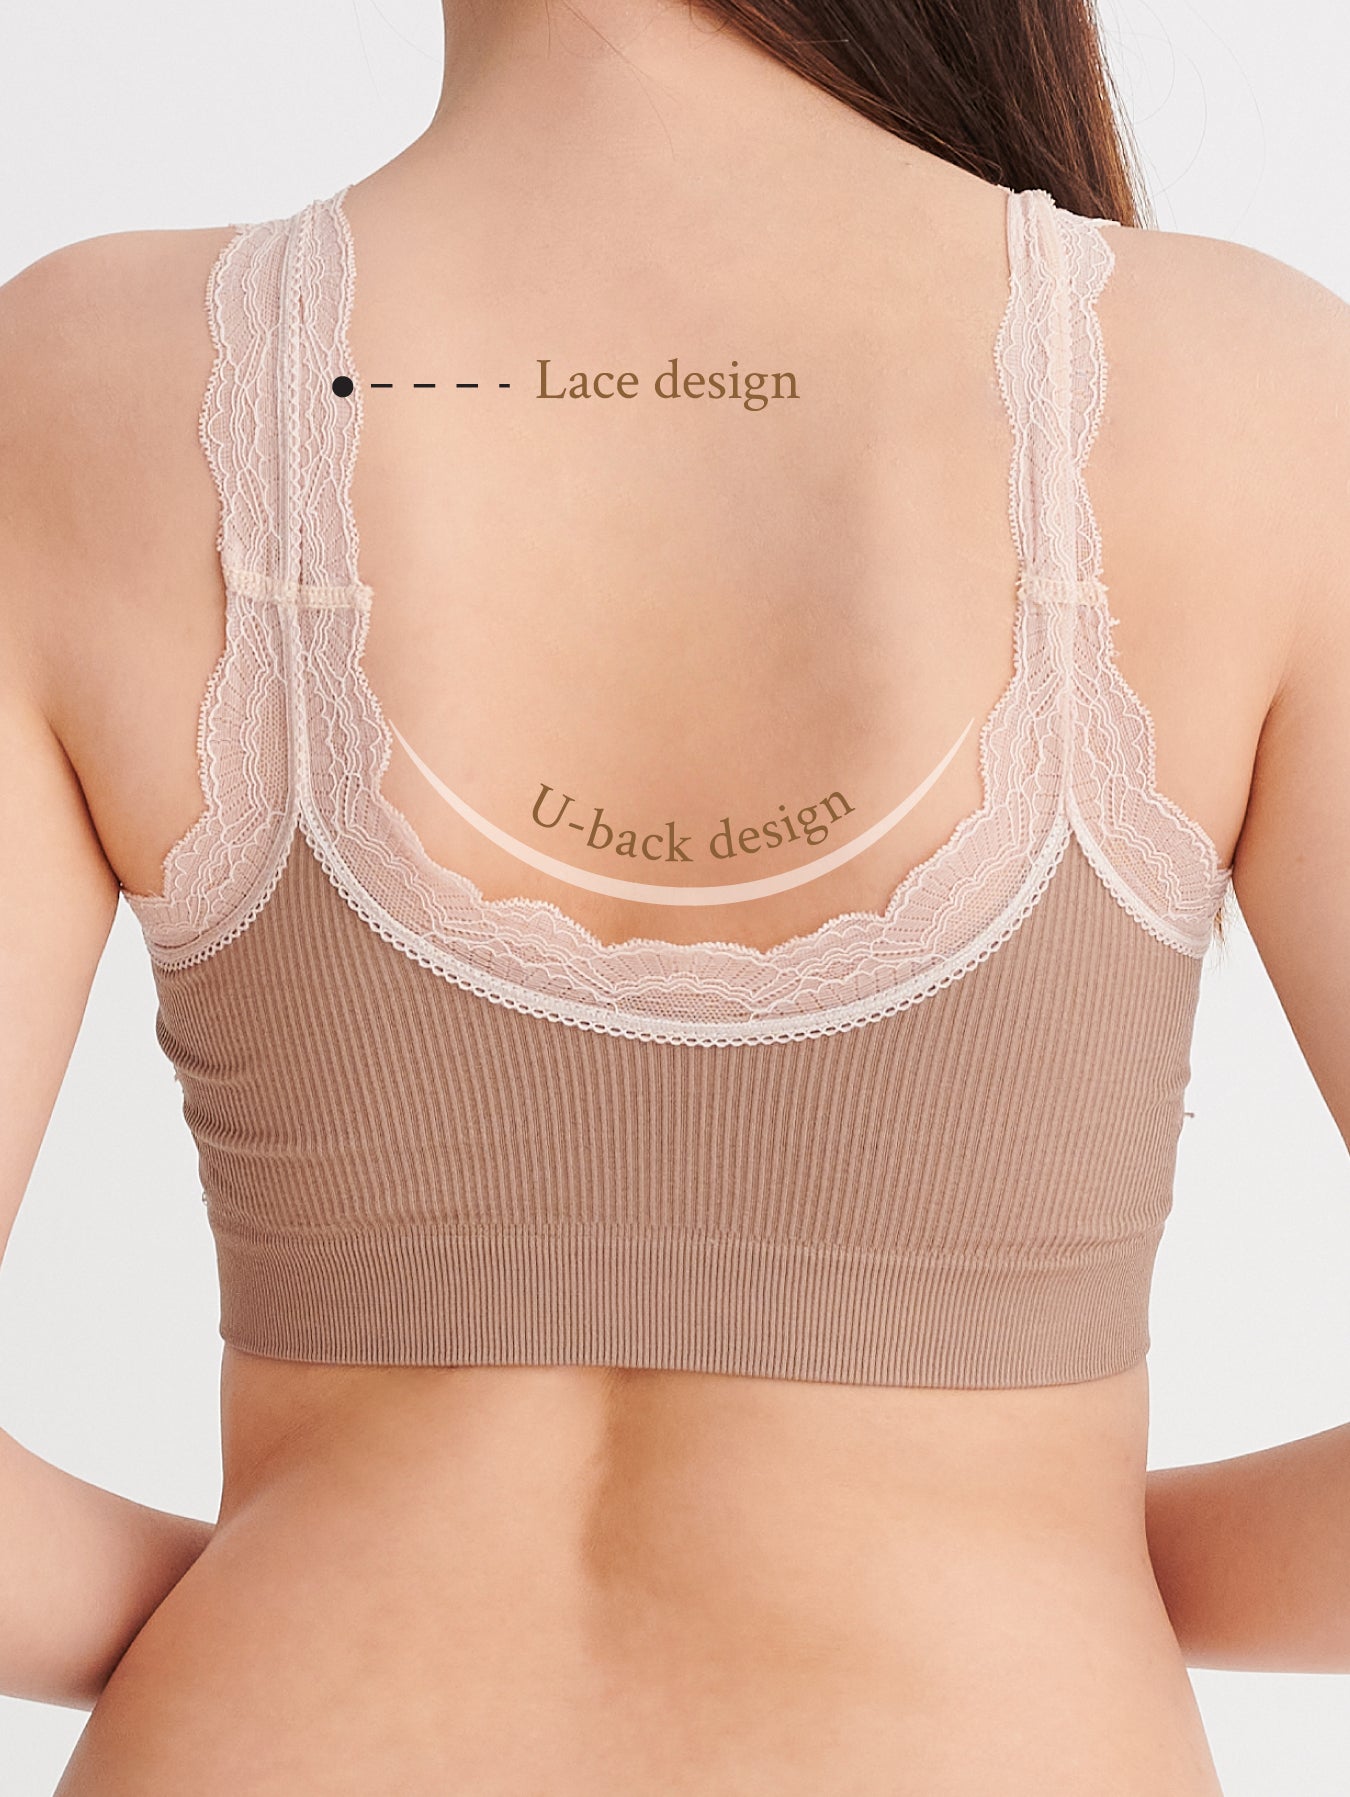 Sport bra with built-in push-up and support for active moms